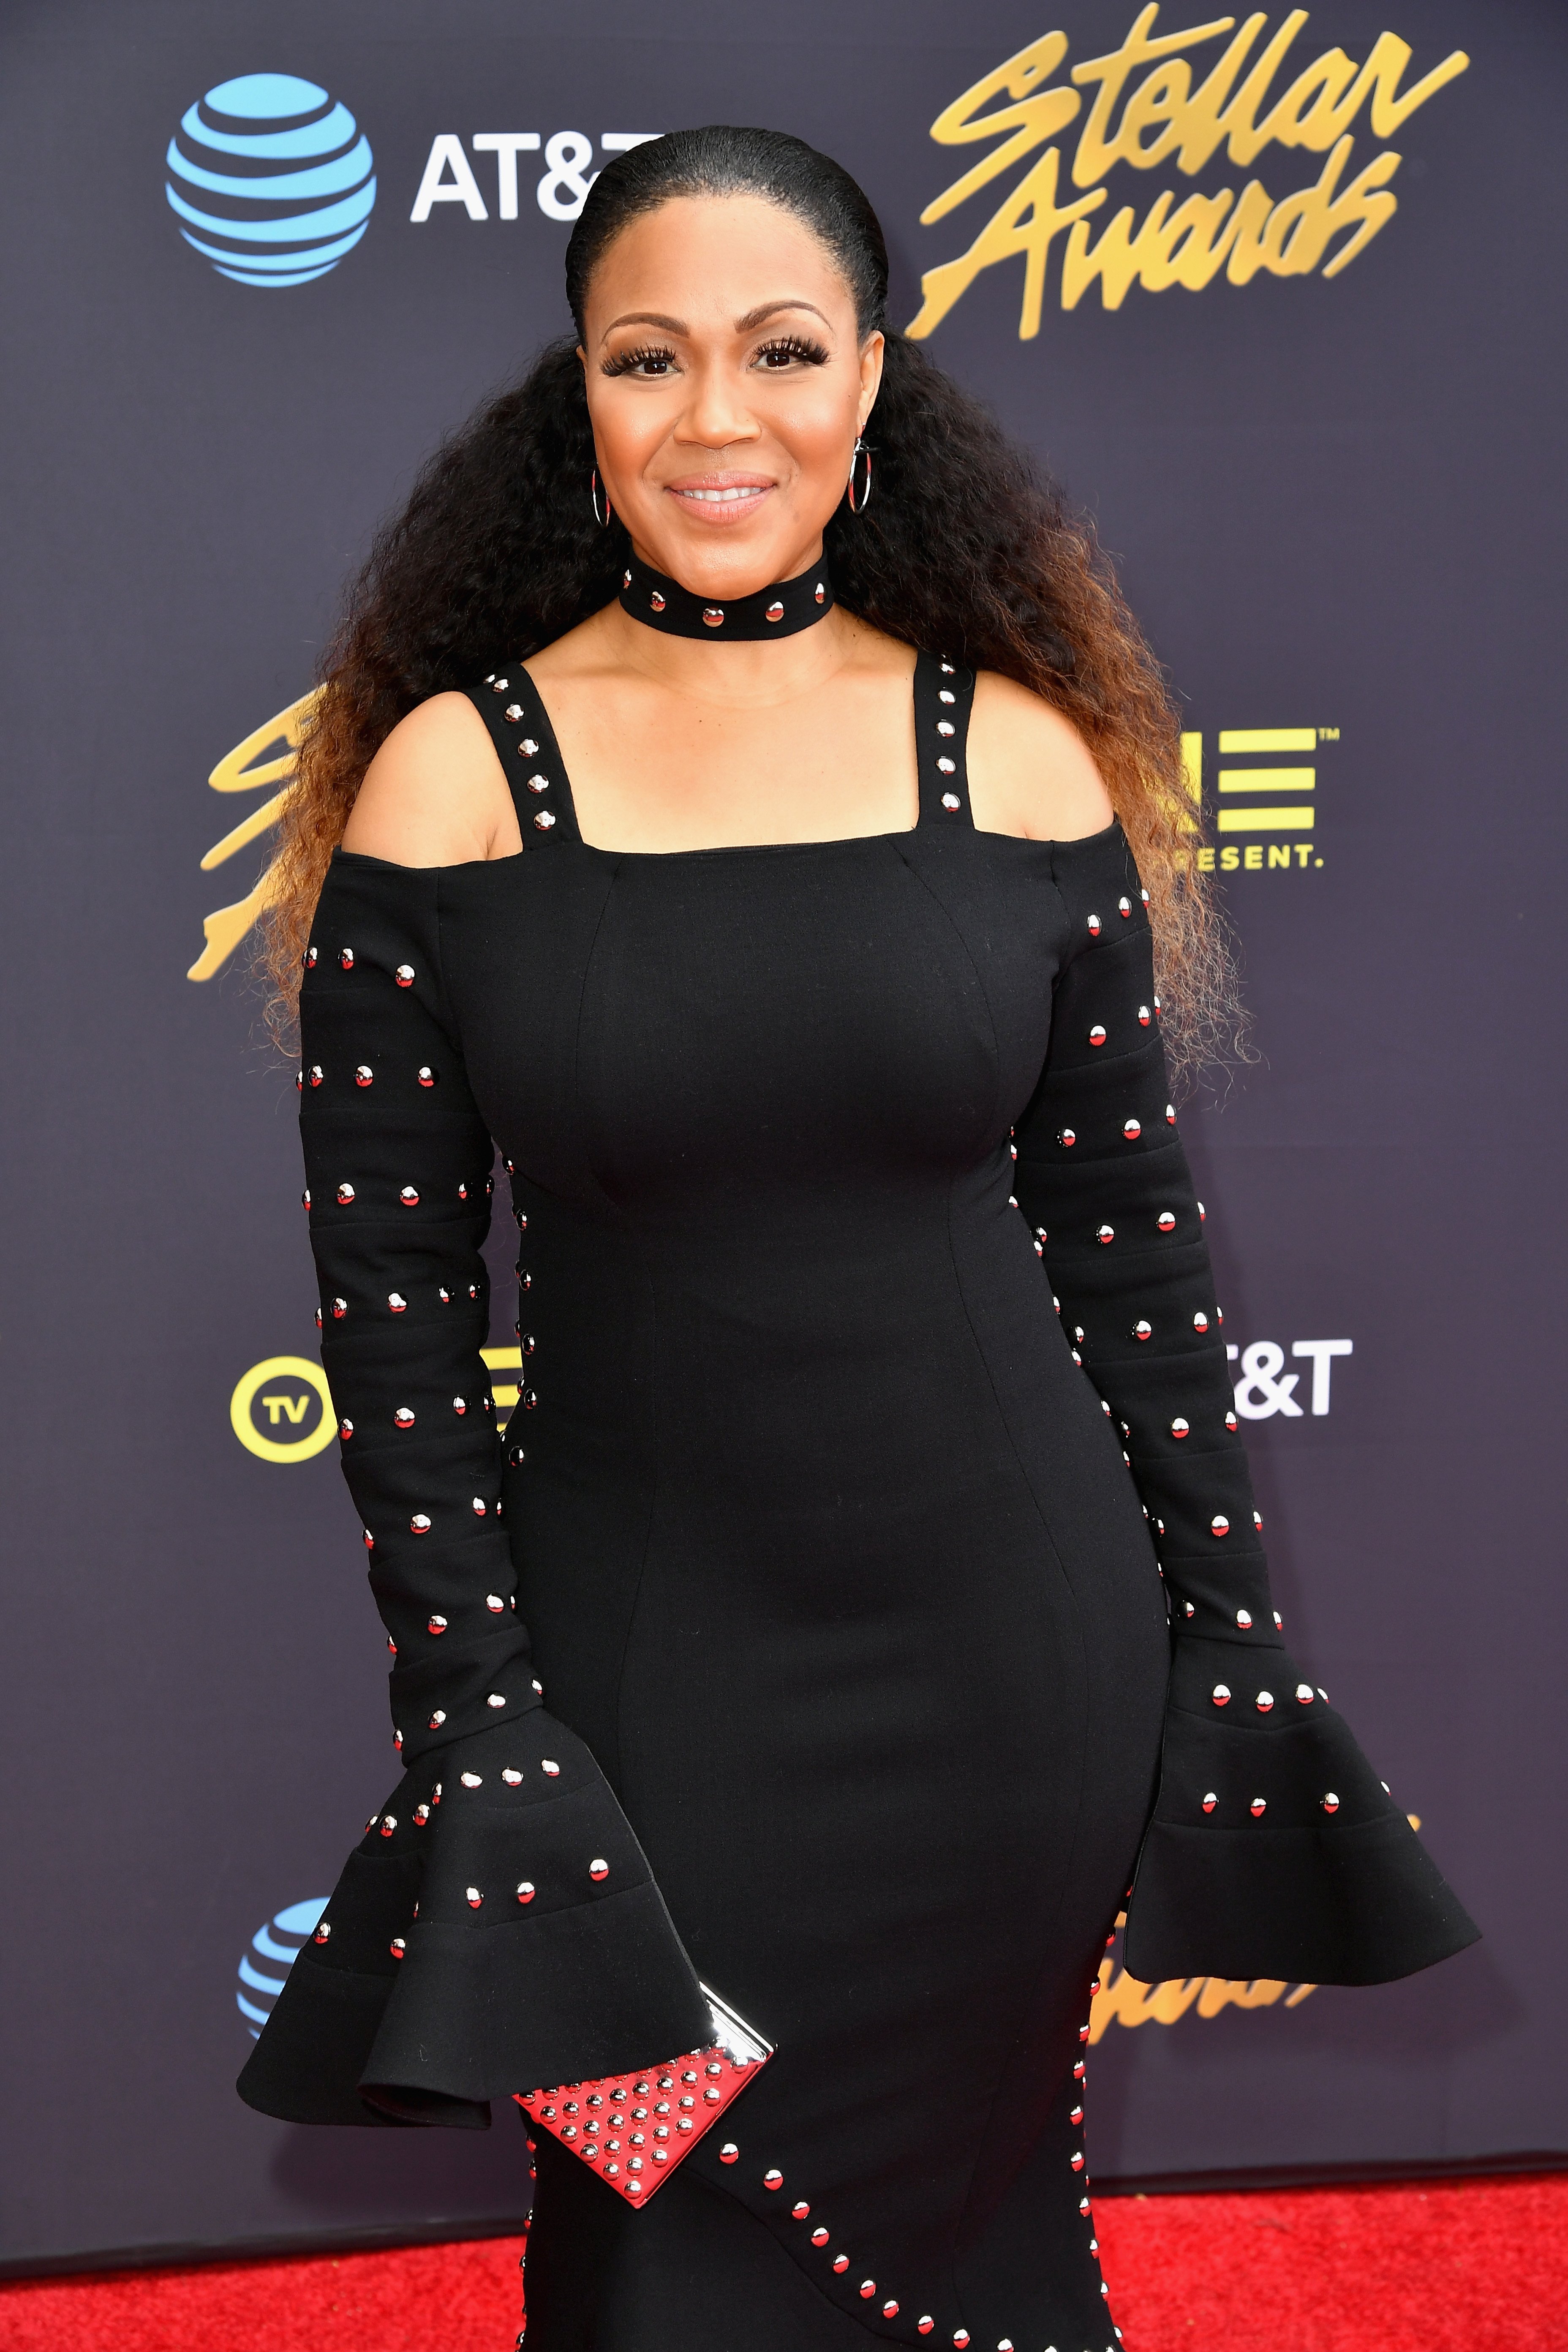 Erica Campbell at the Stellar Gospel Music Awards on Mar. 25, 2017 | Photo: Getty Images